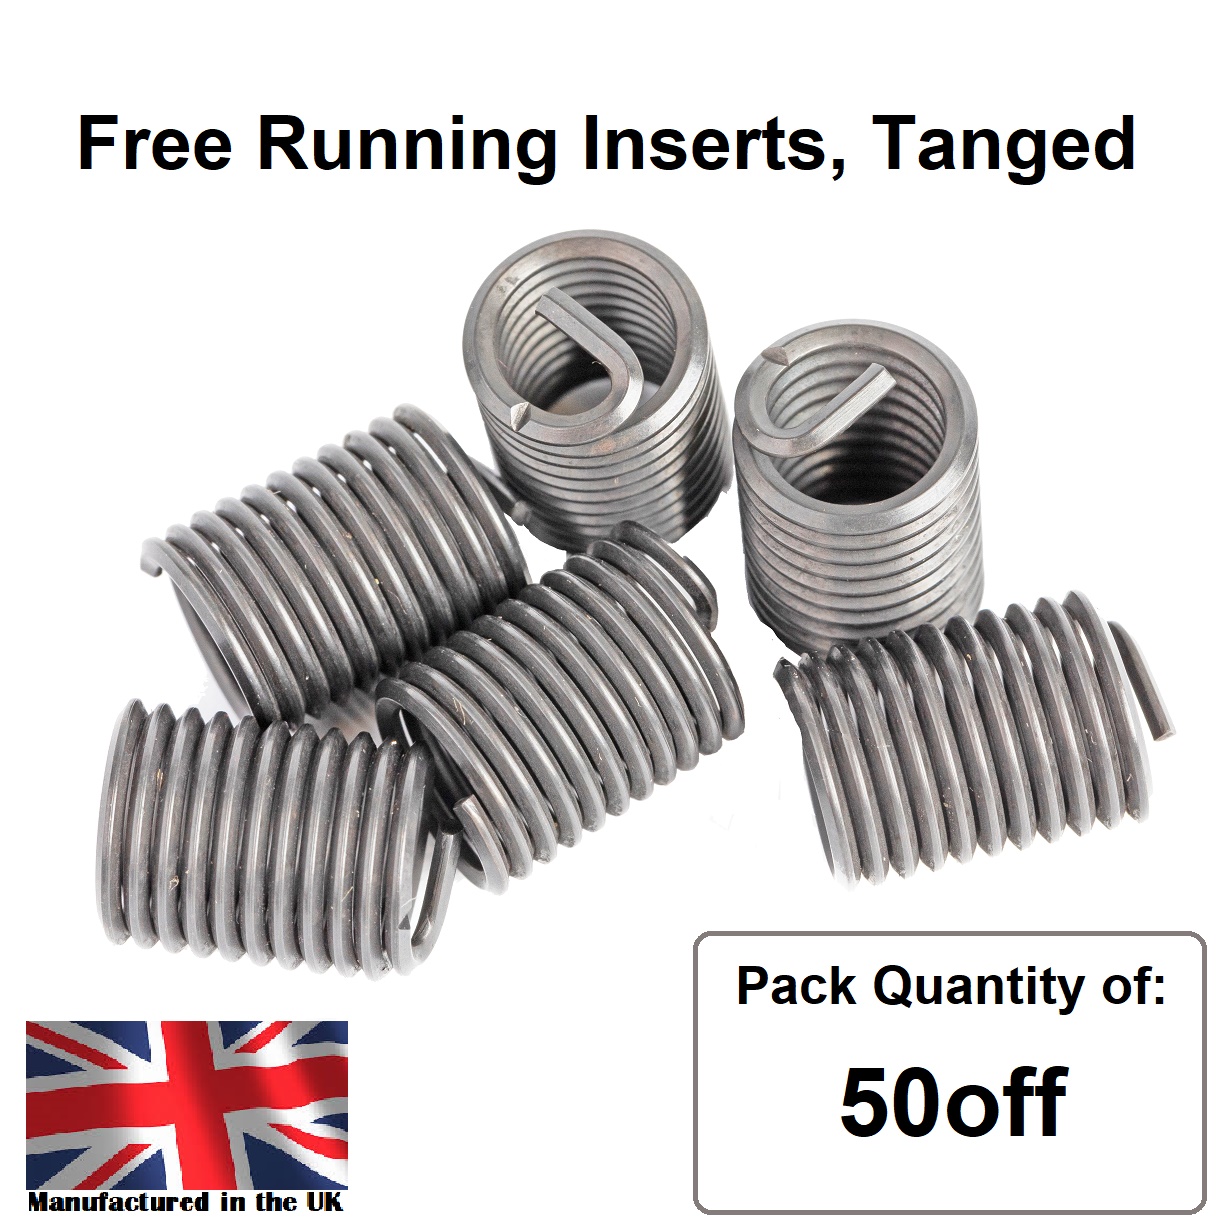 6-32 x 1D UNC, Free Running, Tanged, Wire Thread Repair Insert, 304/A2 Stainless (Pack 50)